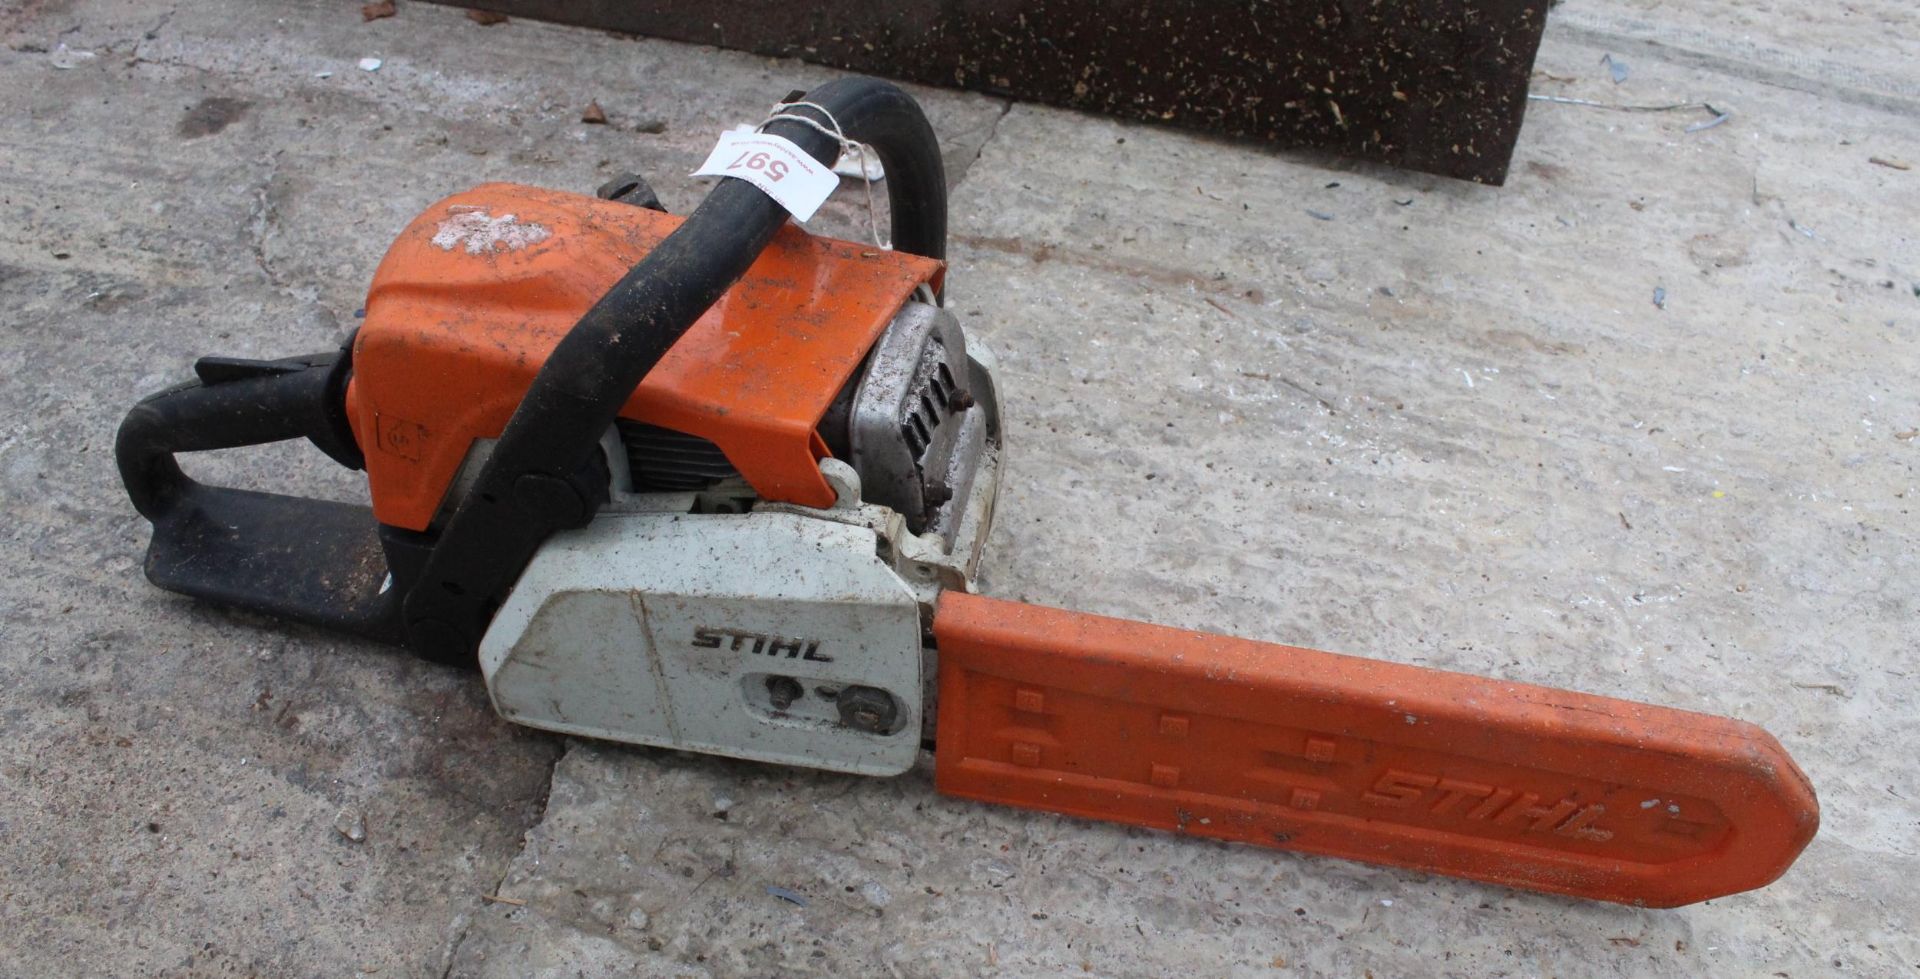 STHIL CHAINSAW MS170 NO VAT - Image 2 of 2